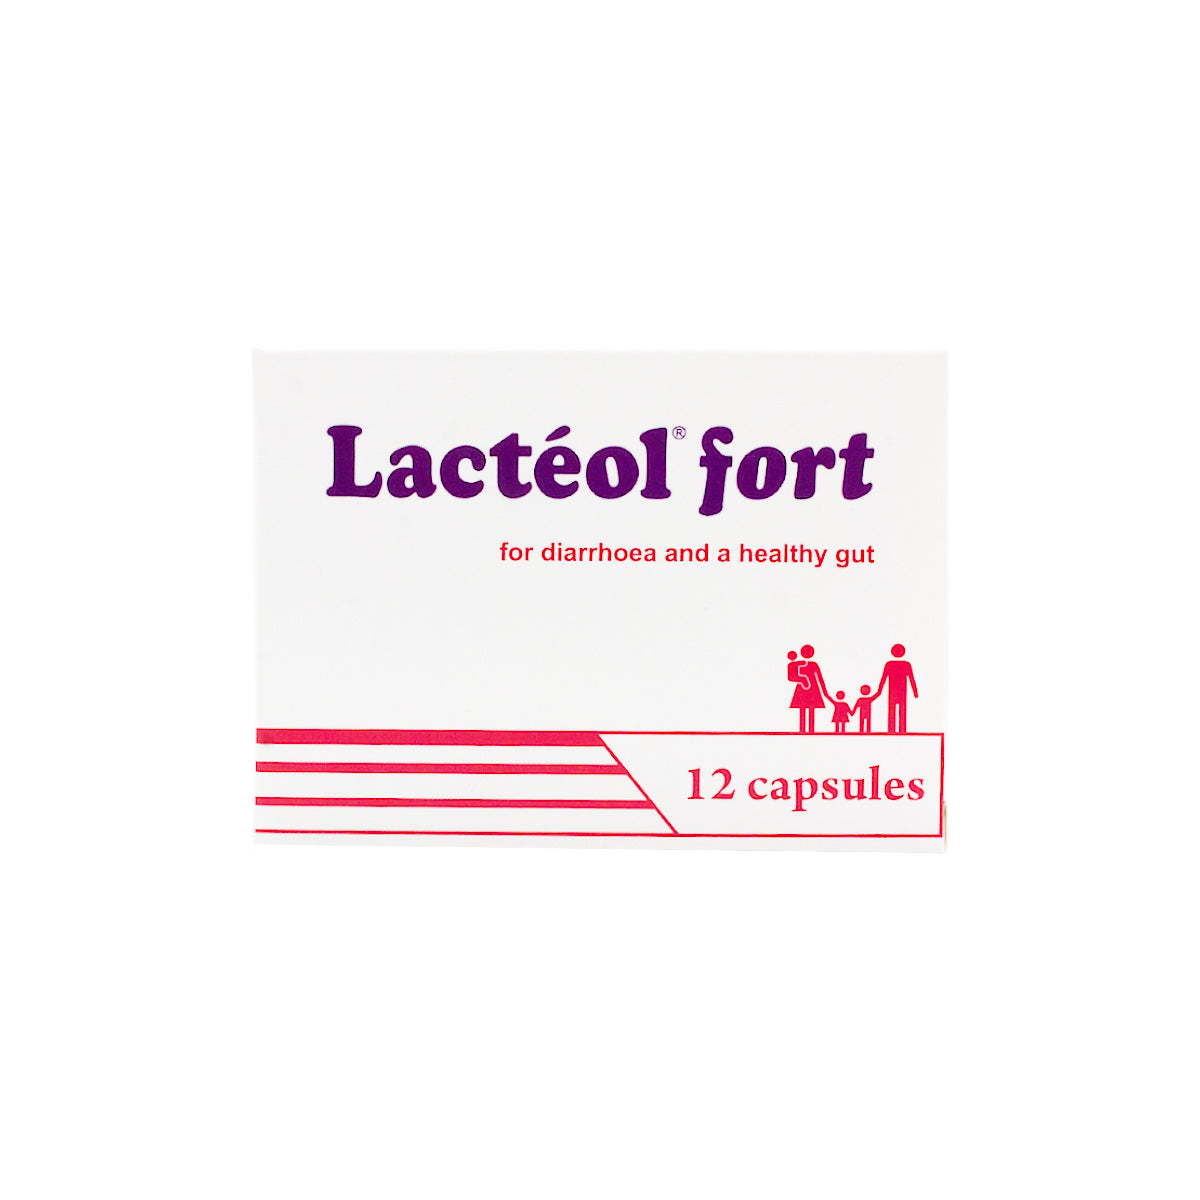 lacteol fort